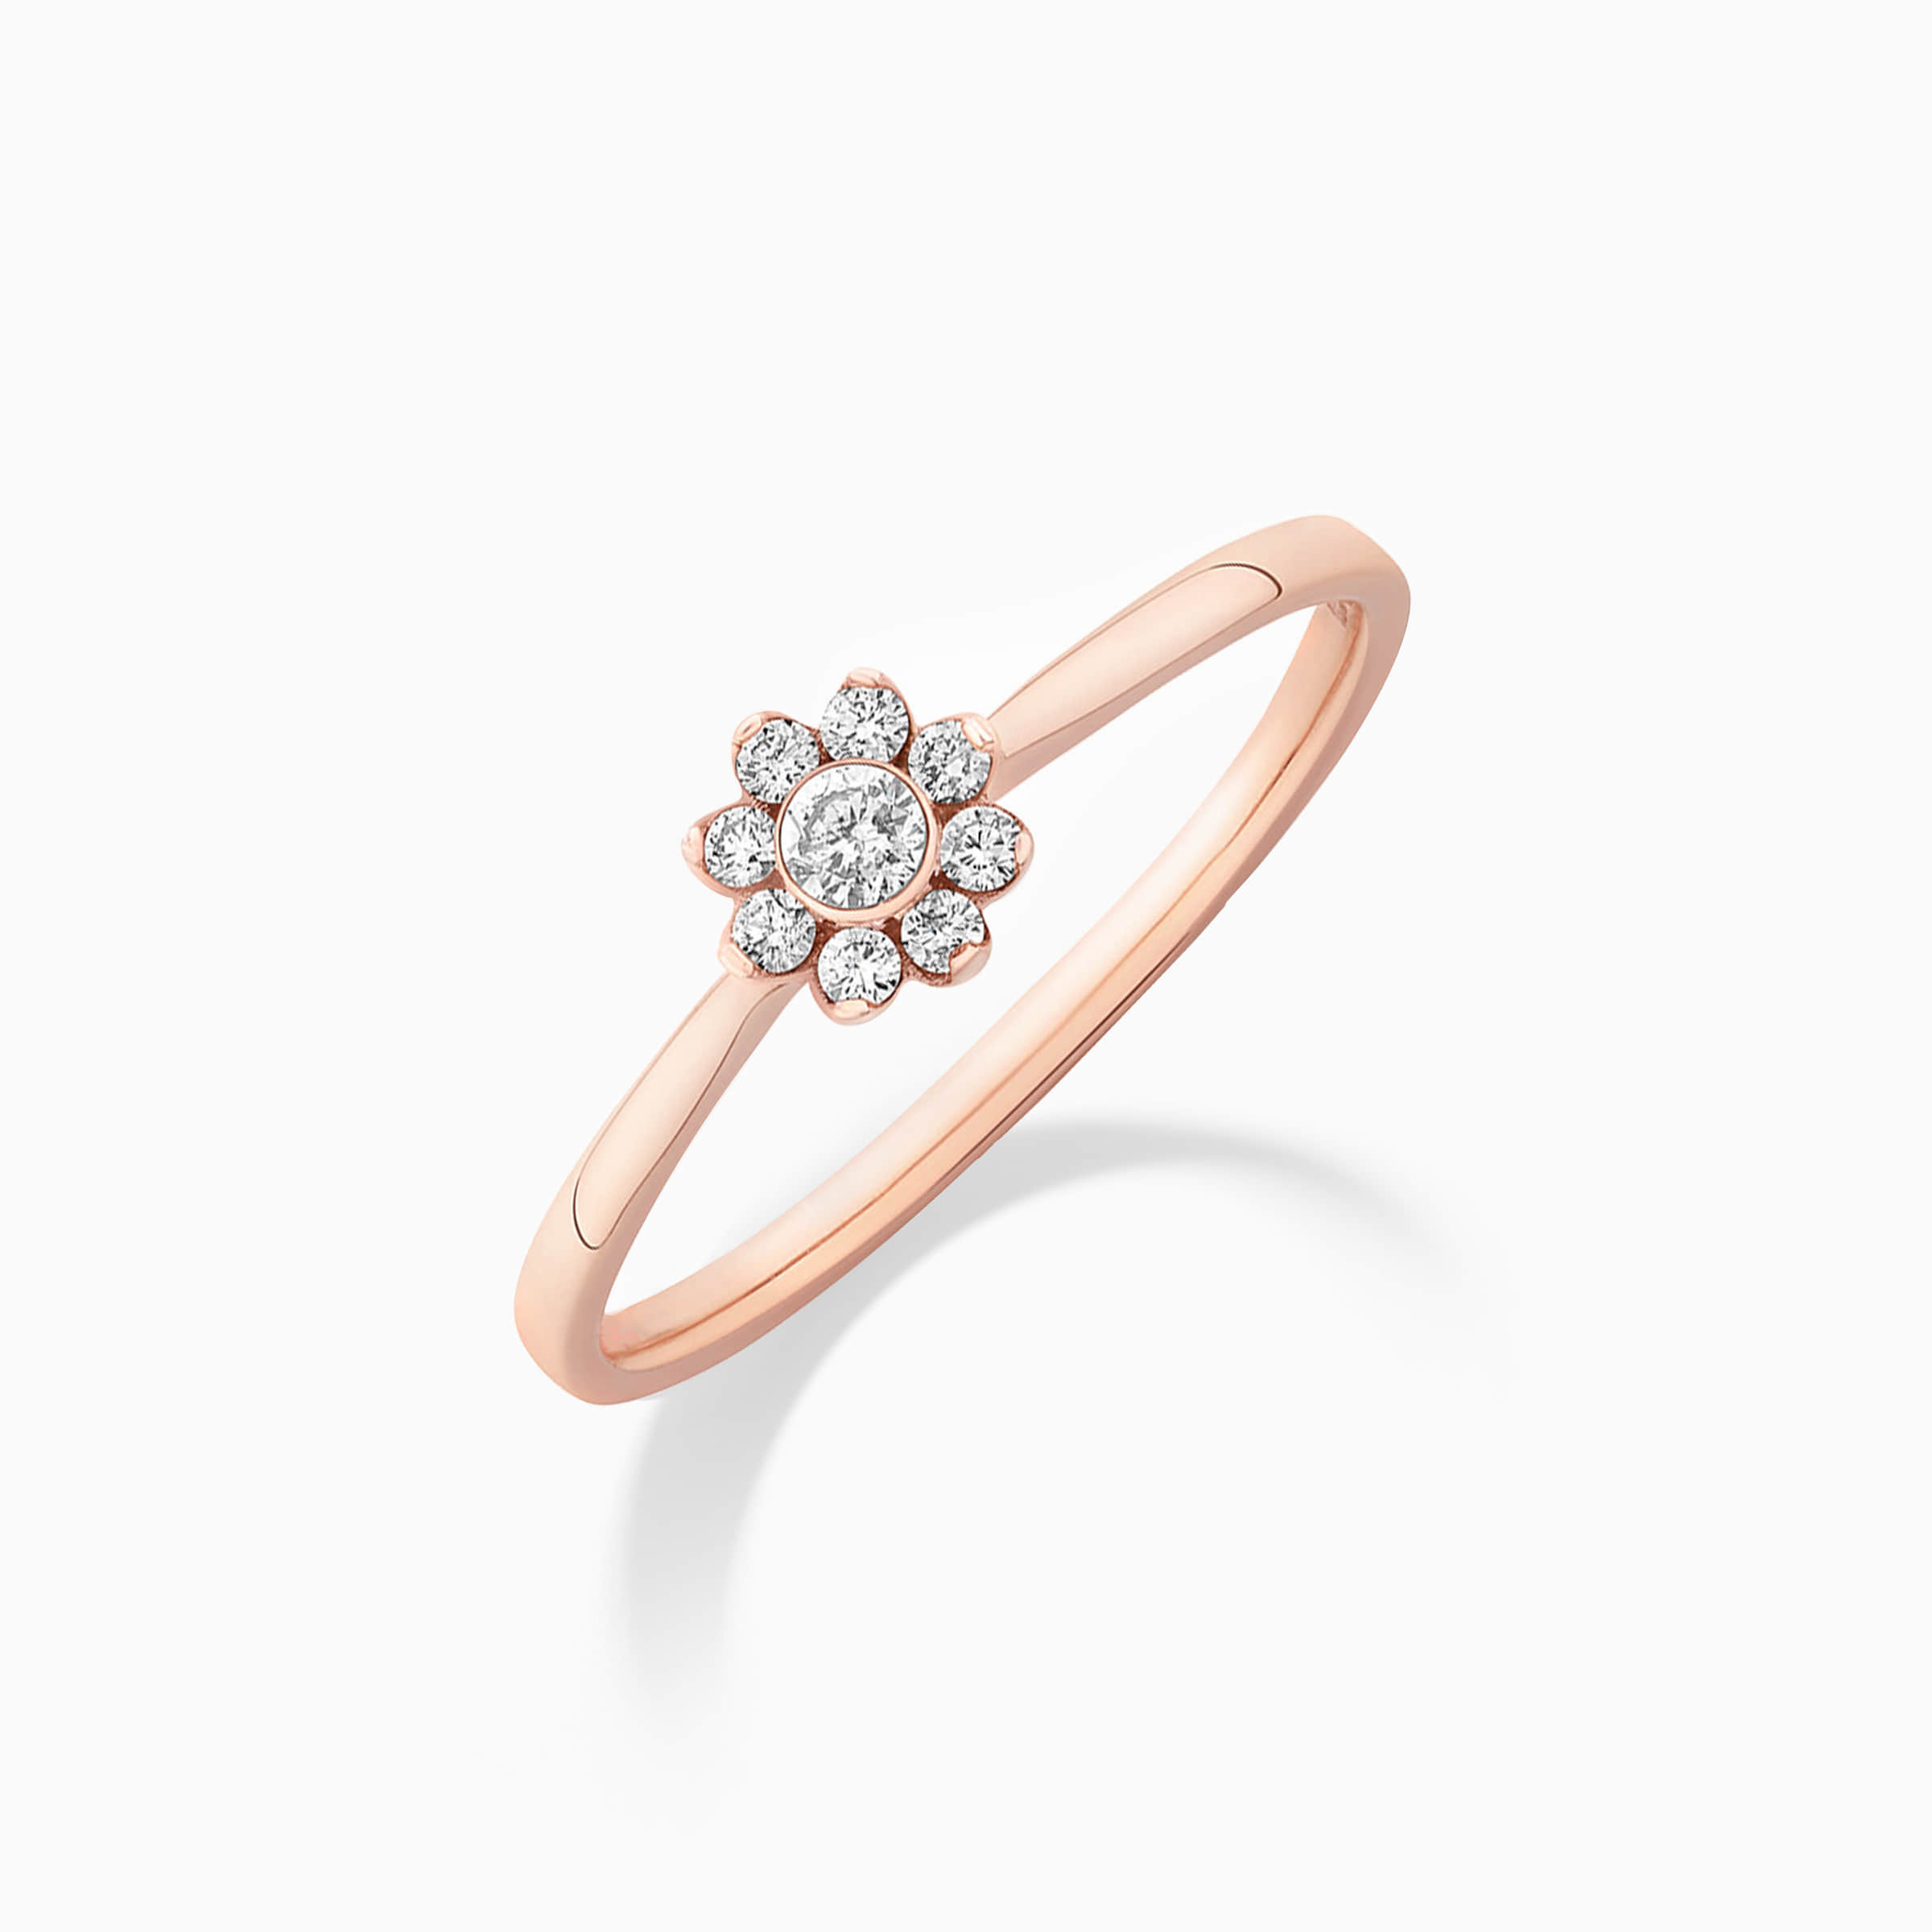 Darry Ring floral halo promise ring in rose gold